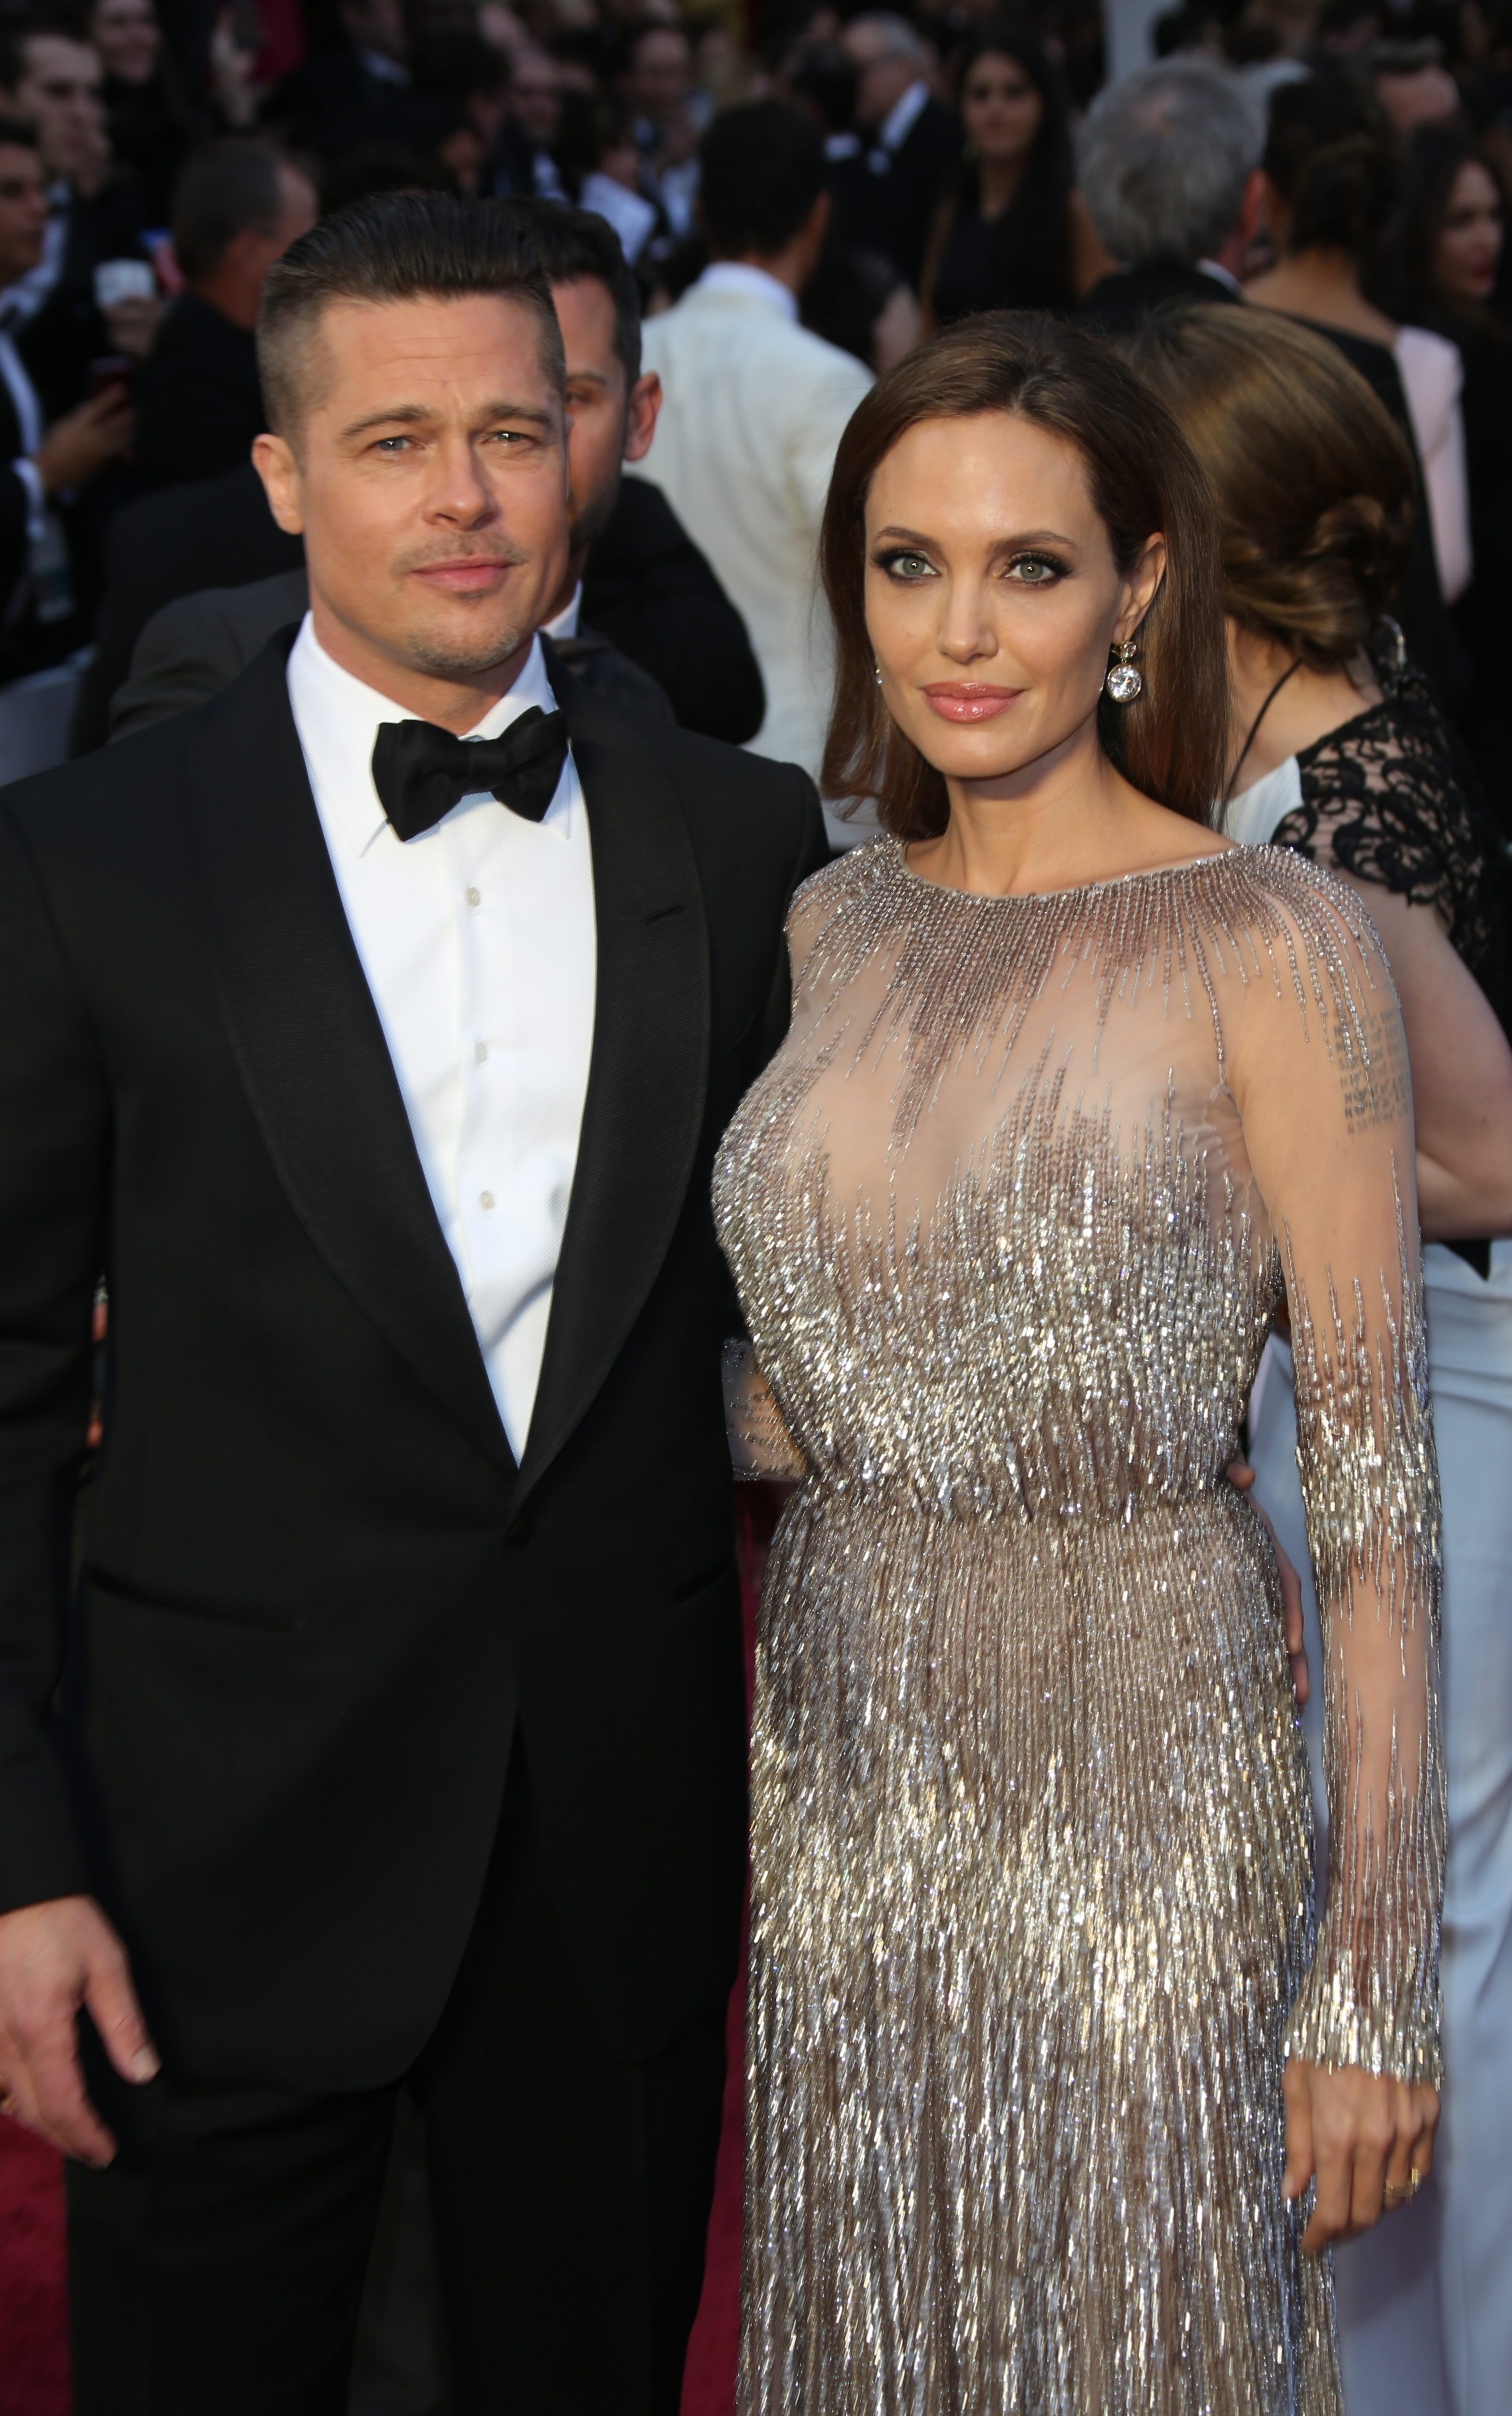 Brad and Angelina in formal attire